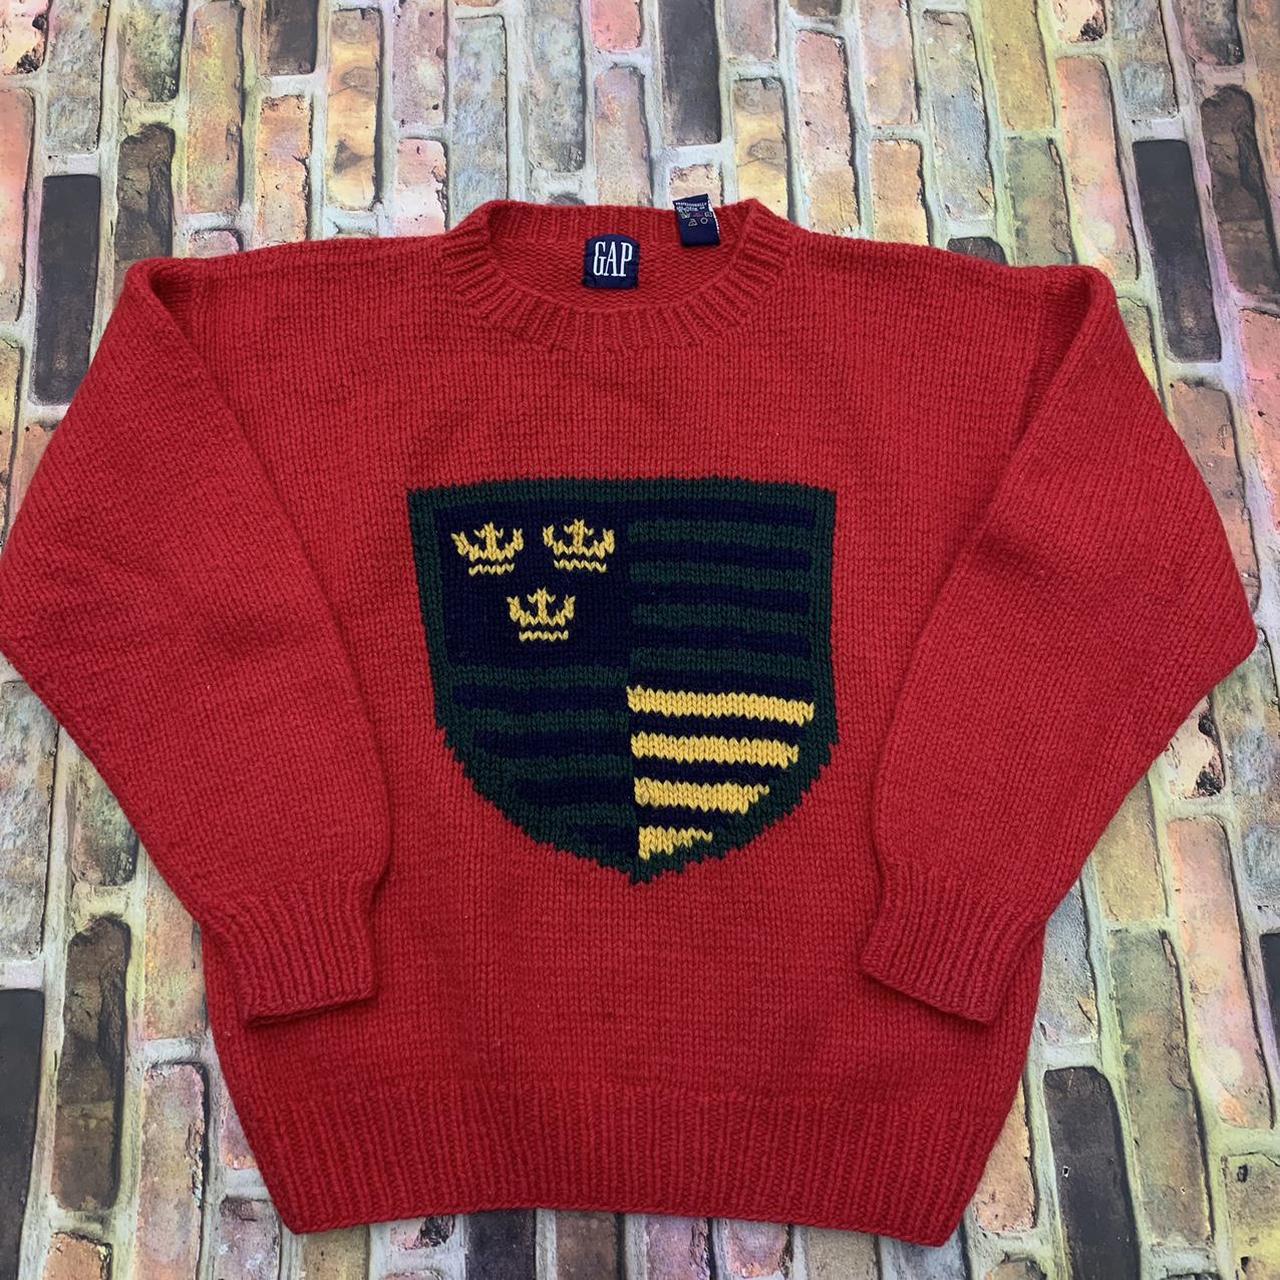 Vintage GAP sweater in red. From the 90s. Mens S.... - Depop